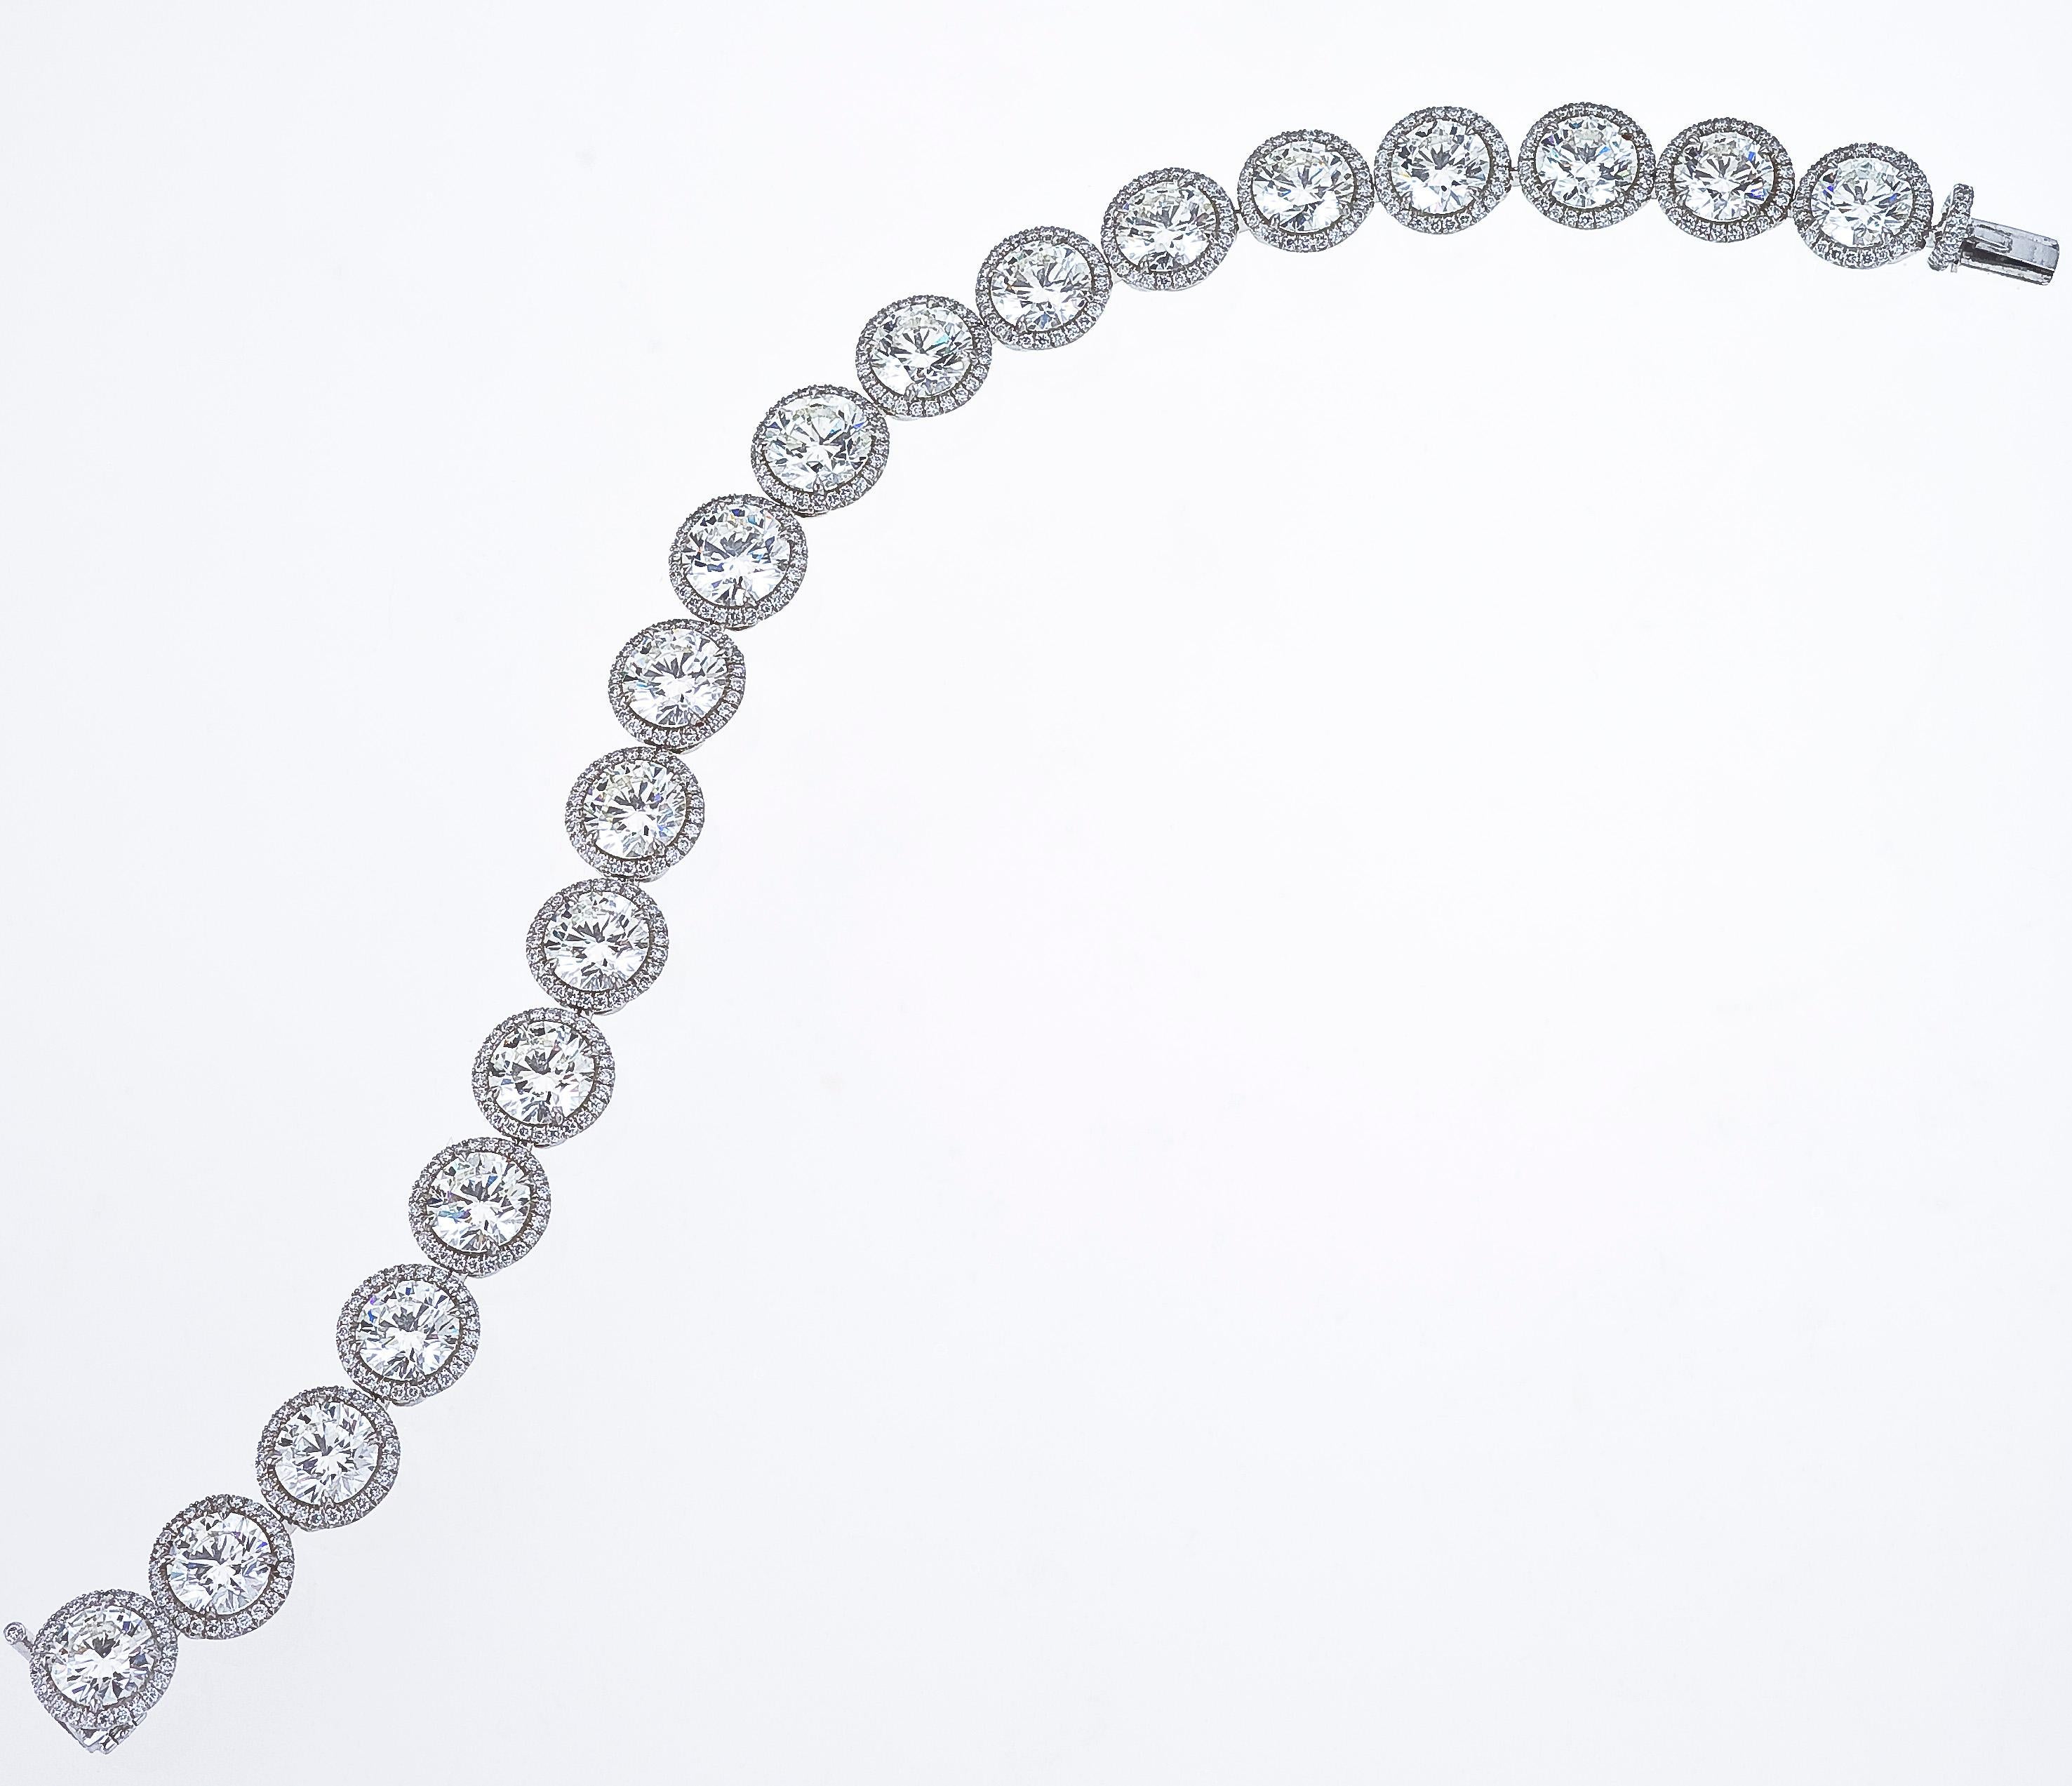 Brilliant Cut Diana M. Platinum diamond bracelet featuring 19.76cts surrounded by 2.16 cts For Sale